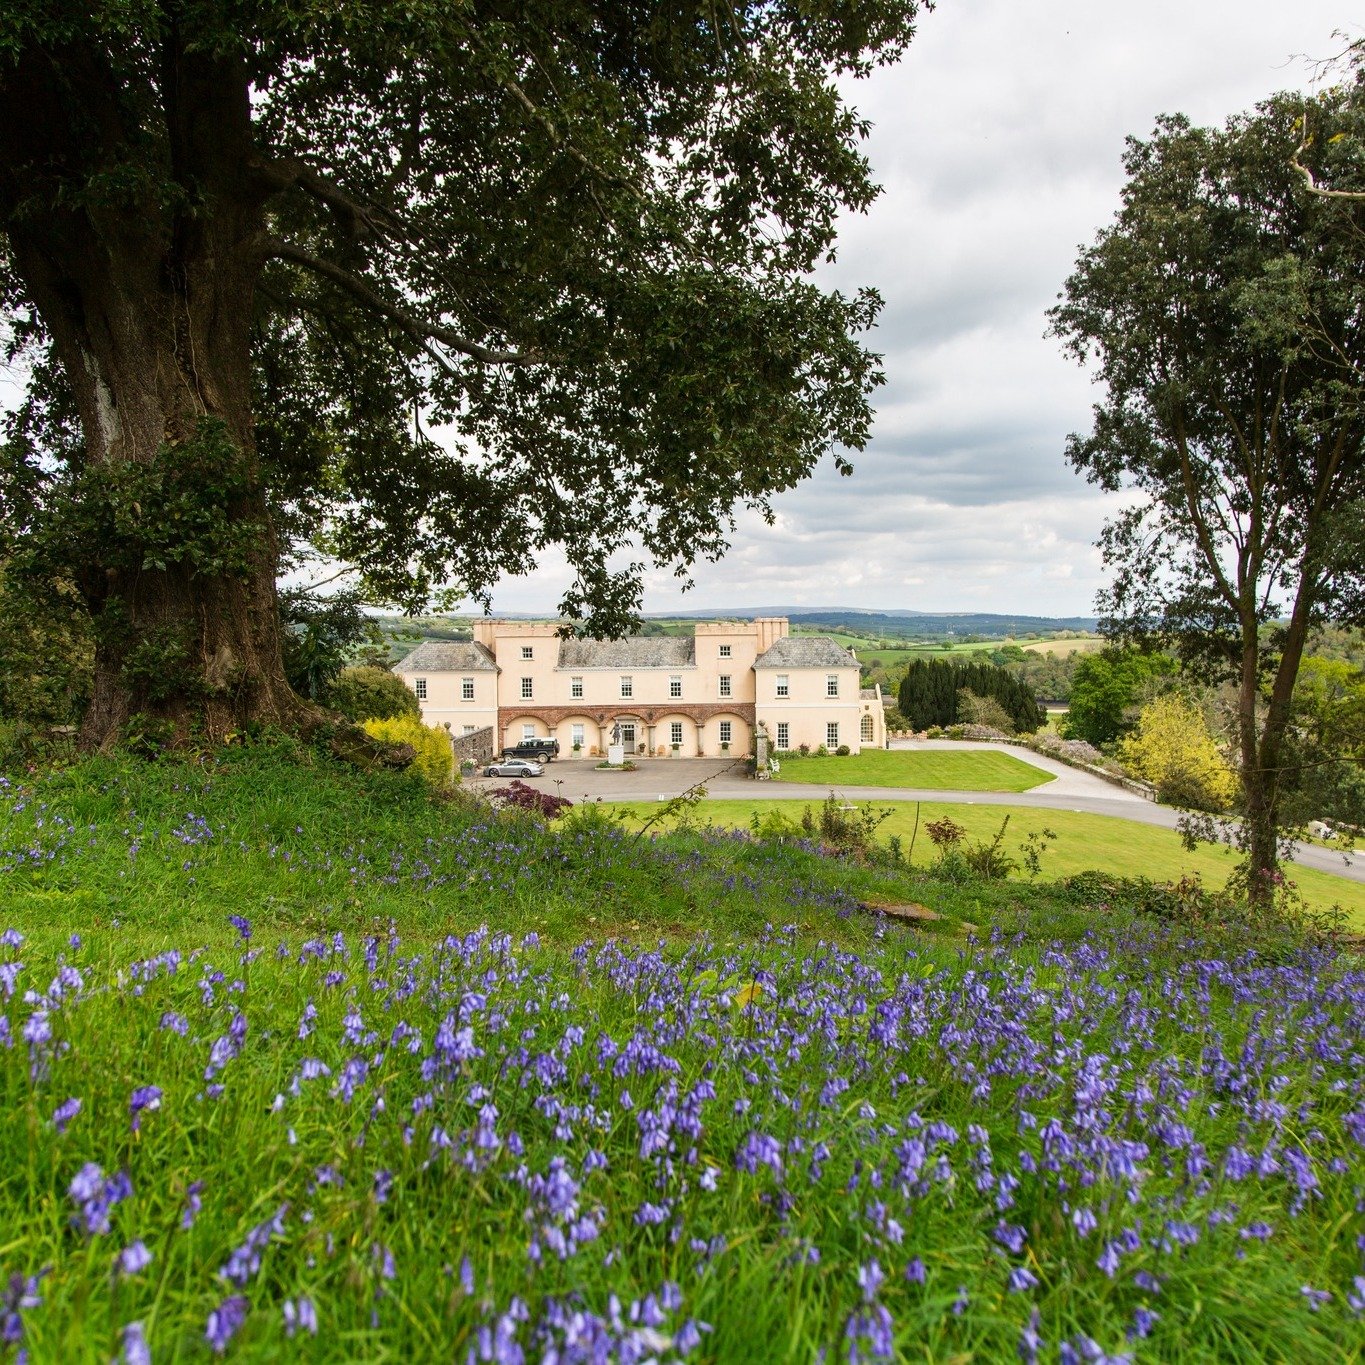 Maintaining 55 acres of historic beauty comes with its challenges...

While we're on the lookout for a new senior gardener, we're excited to kickstart our garden volunteer programme!

We invite you to join us on Tuesday 30th April, from 9am until 12 